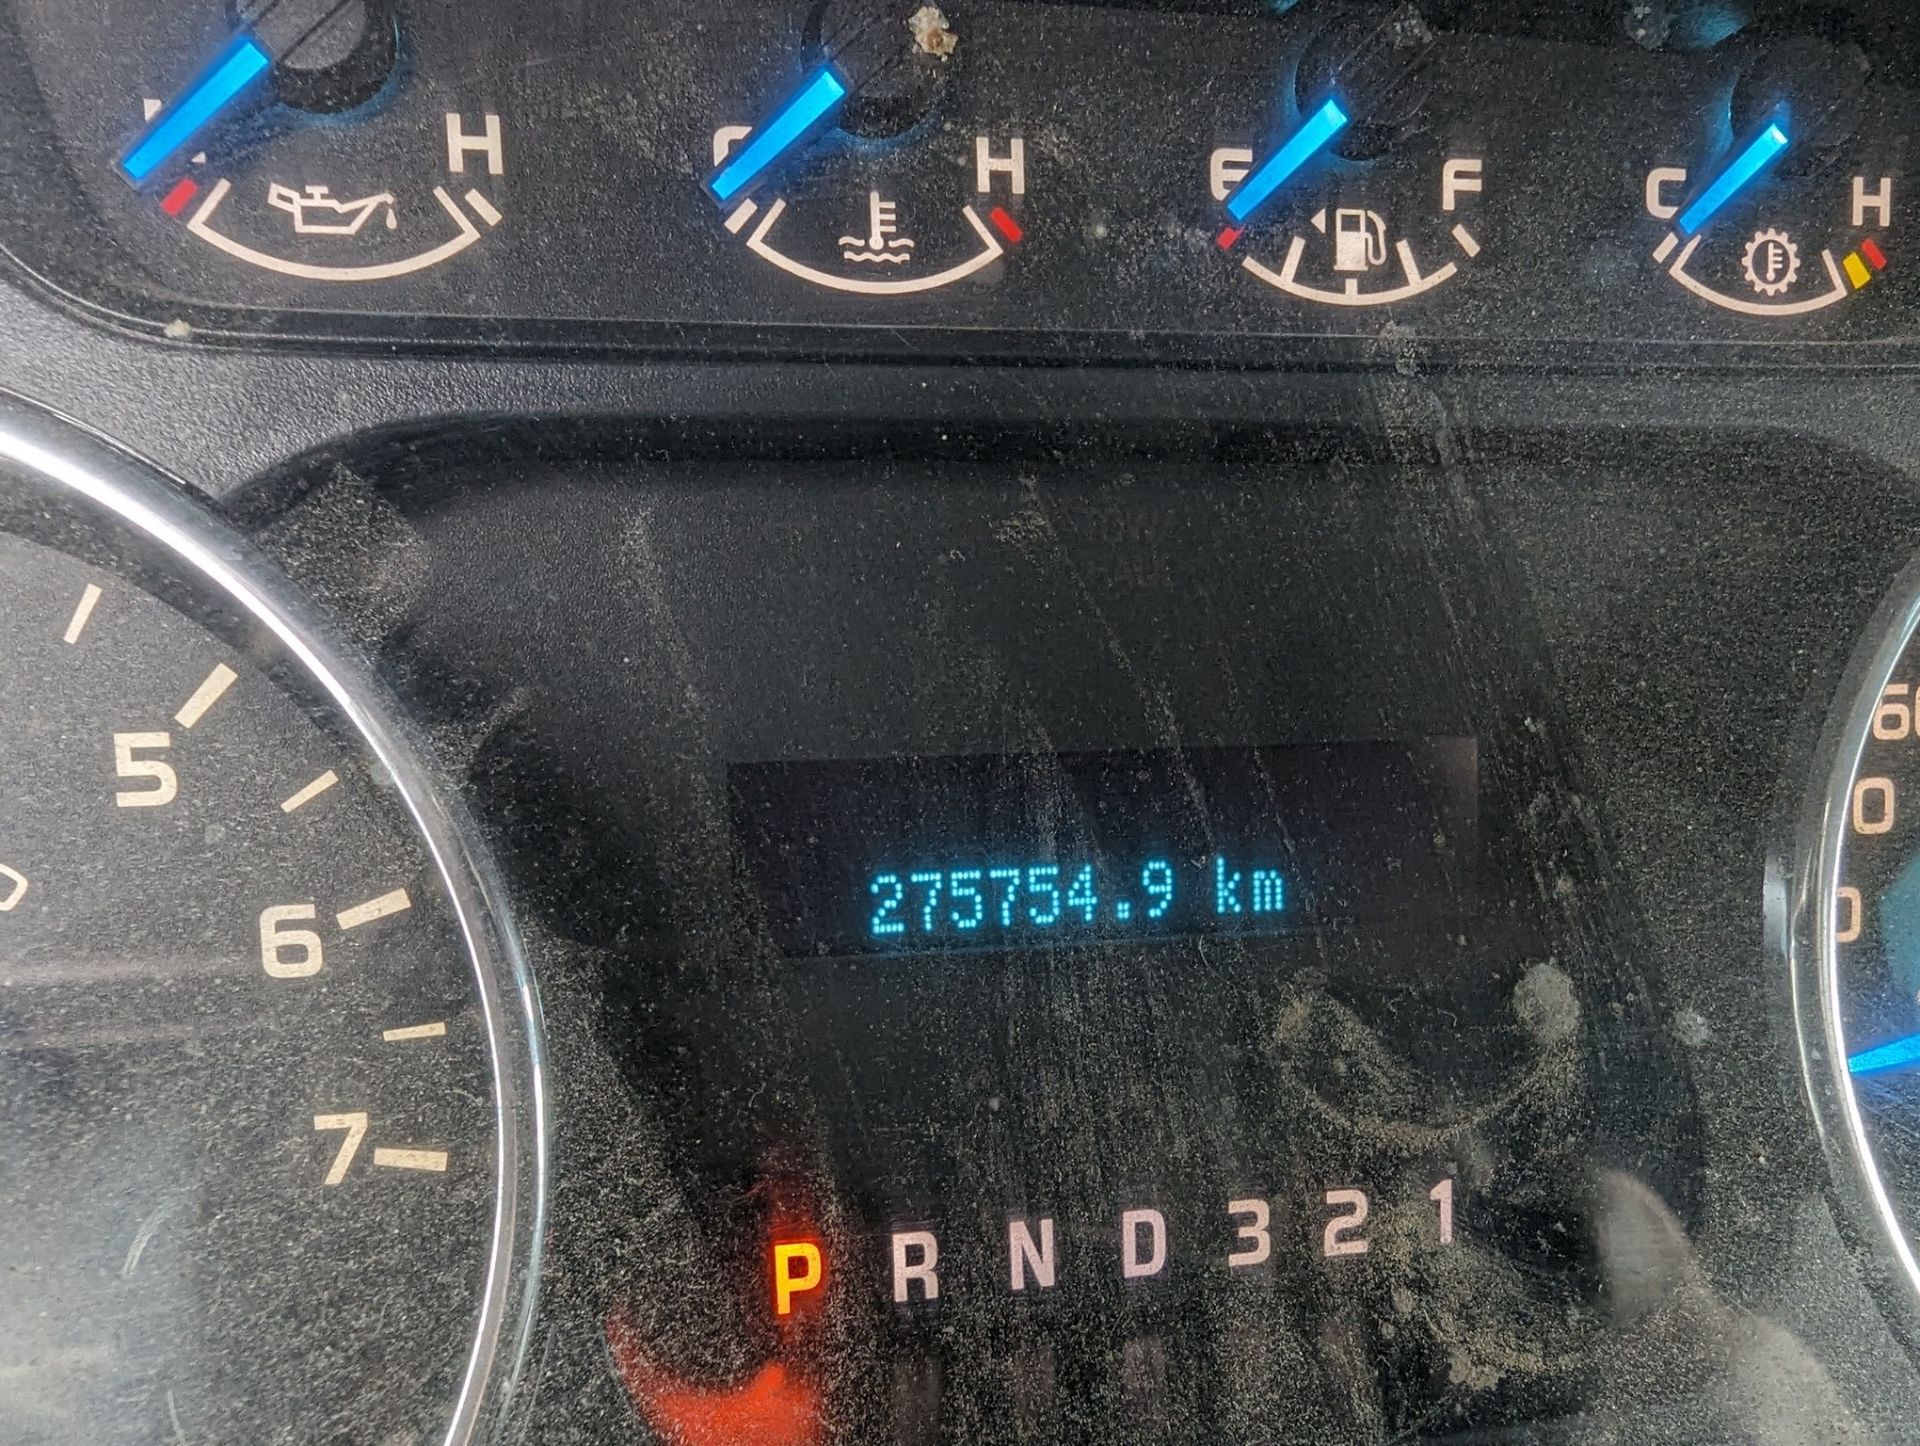 2014 FORD F150 XLT PICKUP TRUCK, VIN# 1FTNF1CF2EKG16322, APPROX. 275,754KMS (NO BLACK TOOL BOXES) - Image 10 of 10